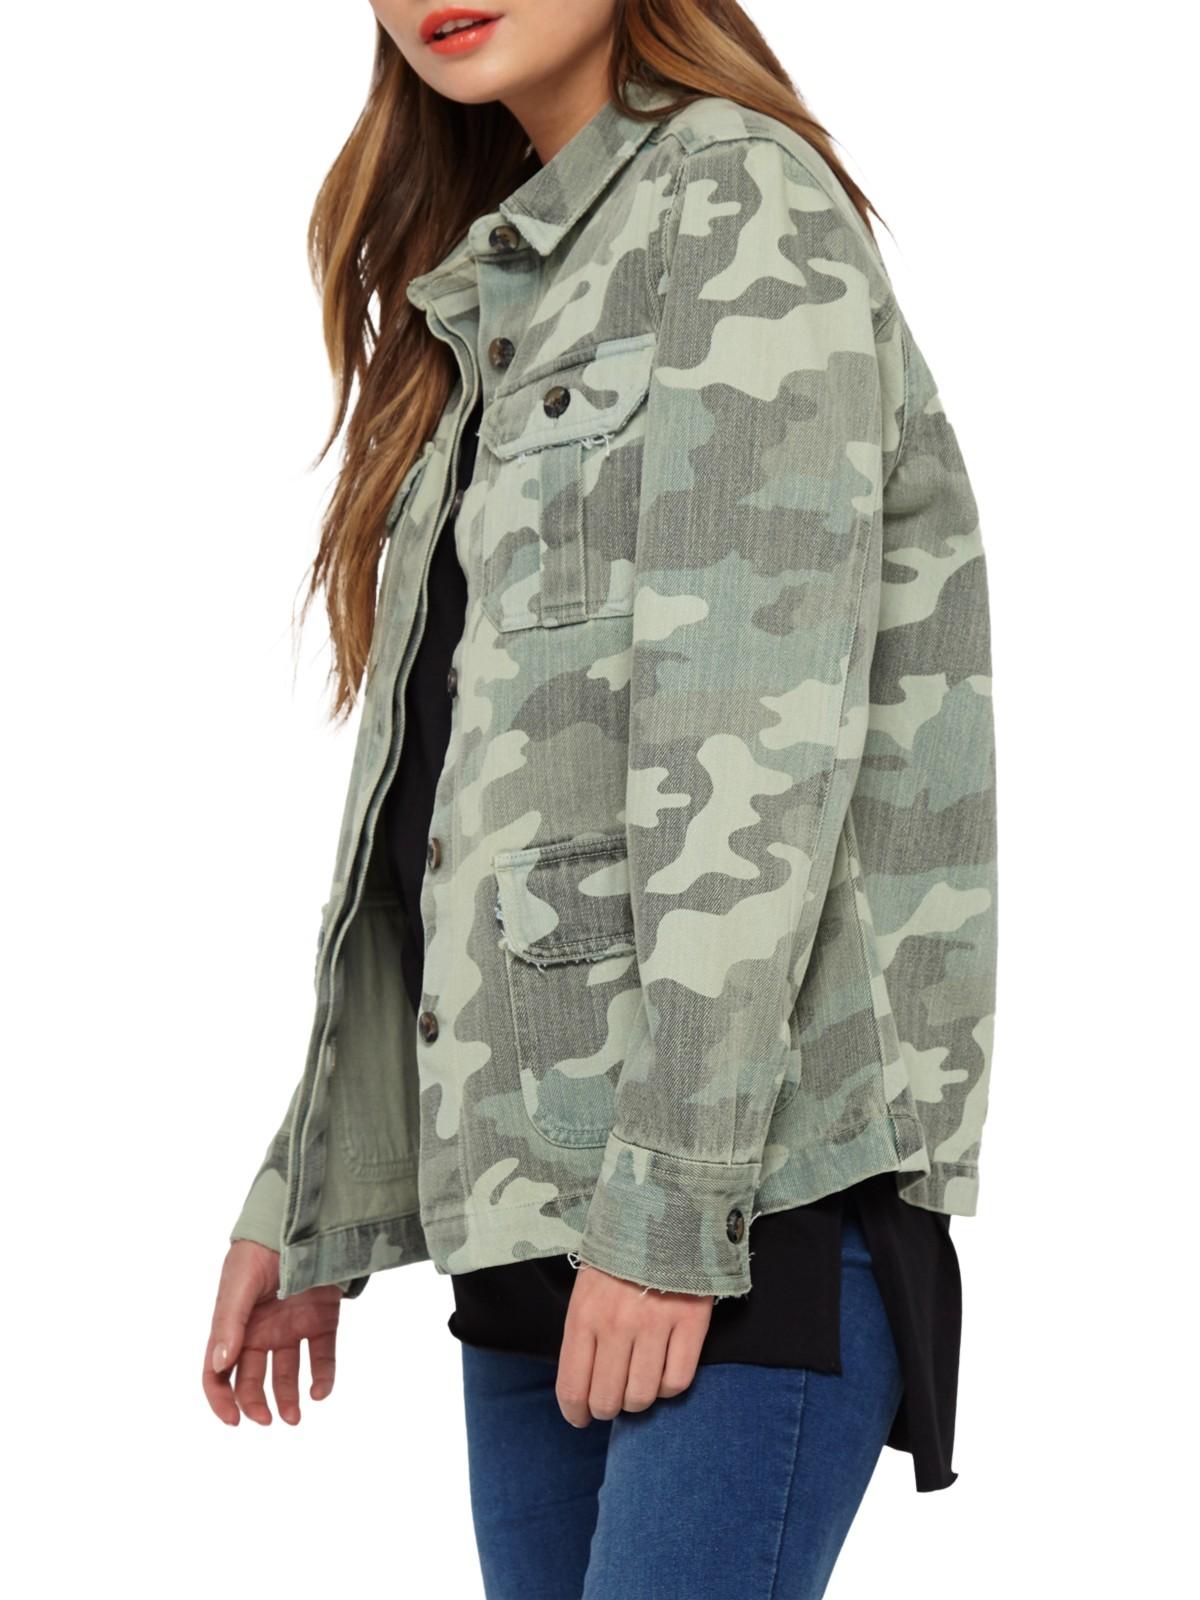 Lyst - Miss Selfridge Army Camouflage Shacket in Green